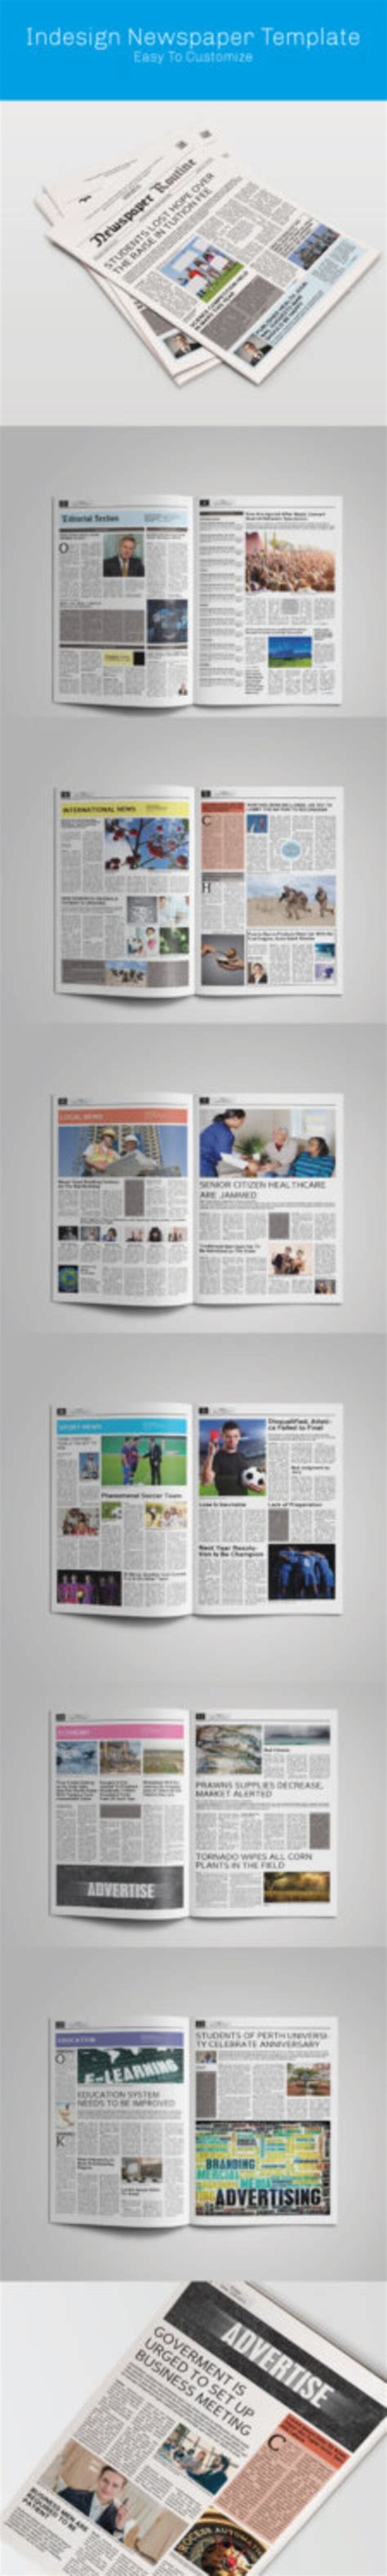 newspaper template tabloid size etsy